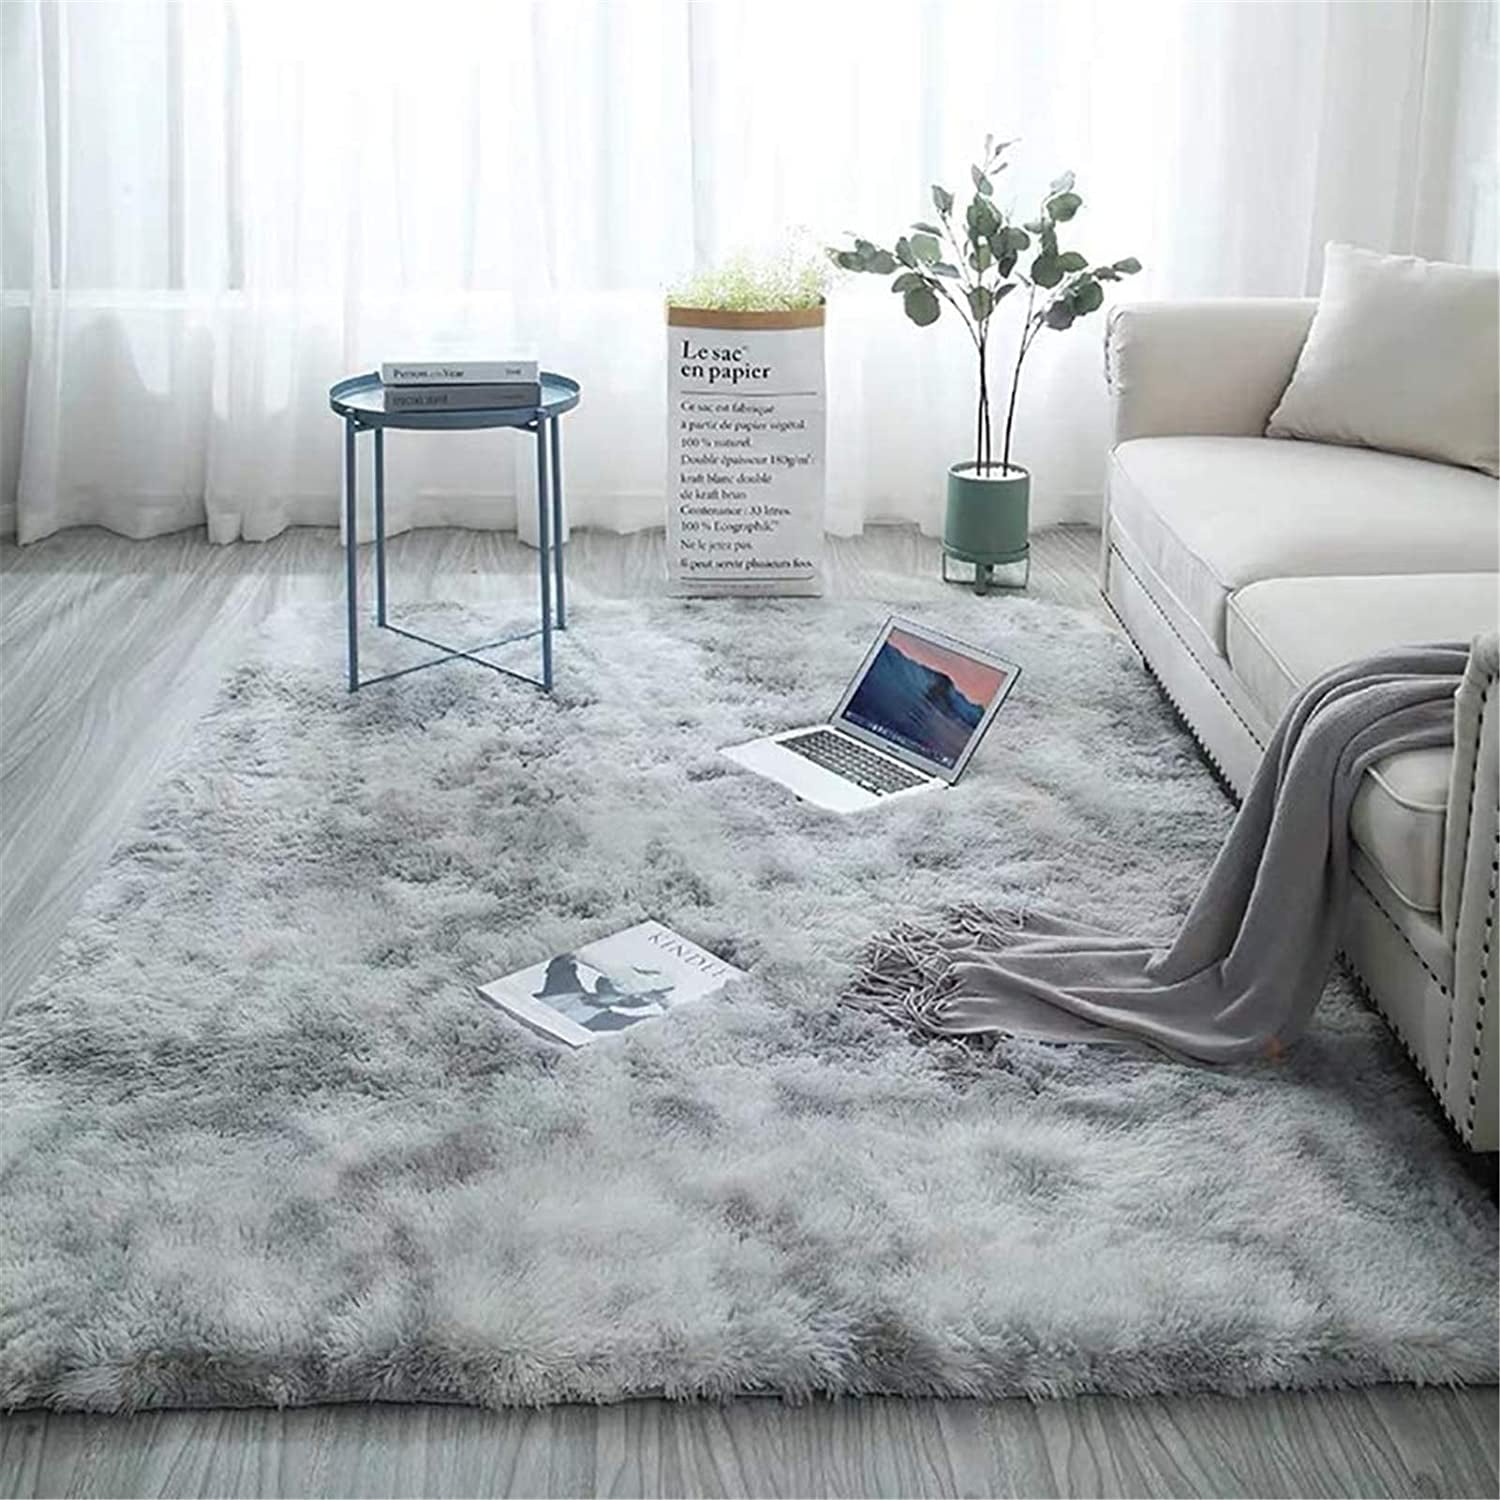 Grey Shaggy Rugs for Living RoomModern Luxurious Cosy Area Rug UK LAST FEW 